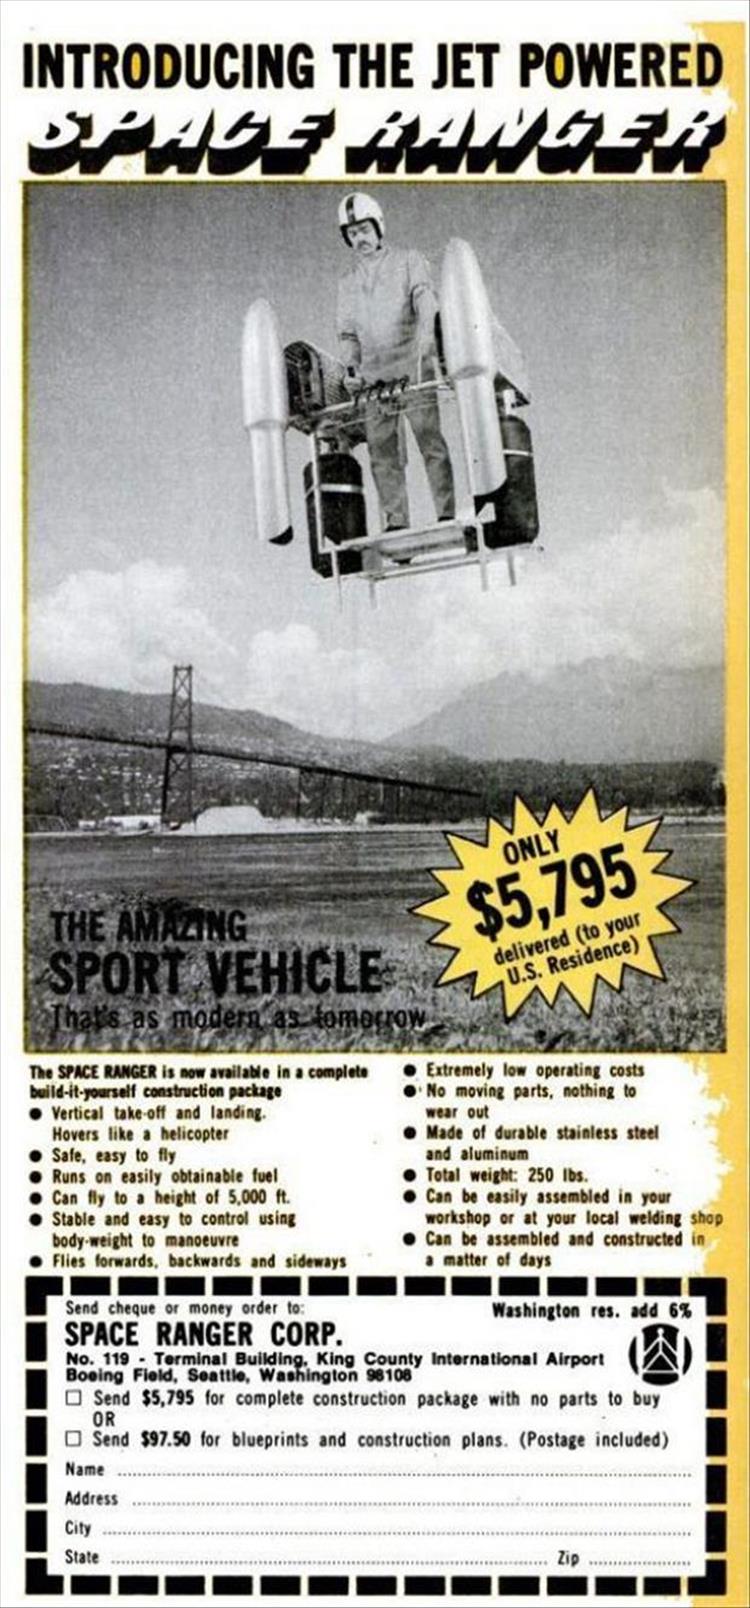 jet powered space ranger - Introducing The Jet Powered Stage Only $5,795 The Amaang Sport Vehicle That's as modern as tomorrow delivered to your U.S. Residence The Space Ranger is now available in a complete buildityourself construction package Vertical t